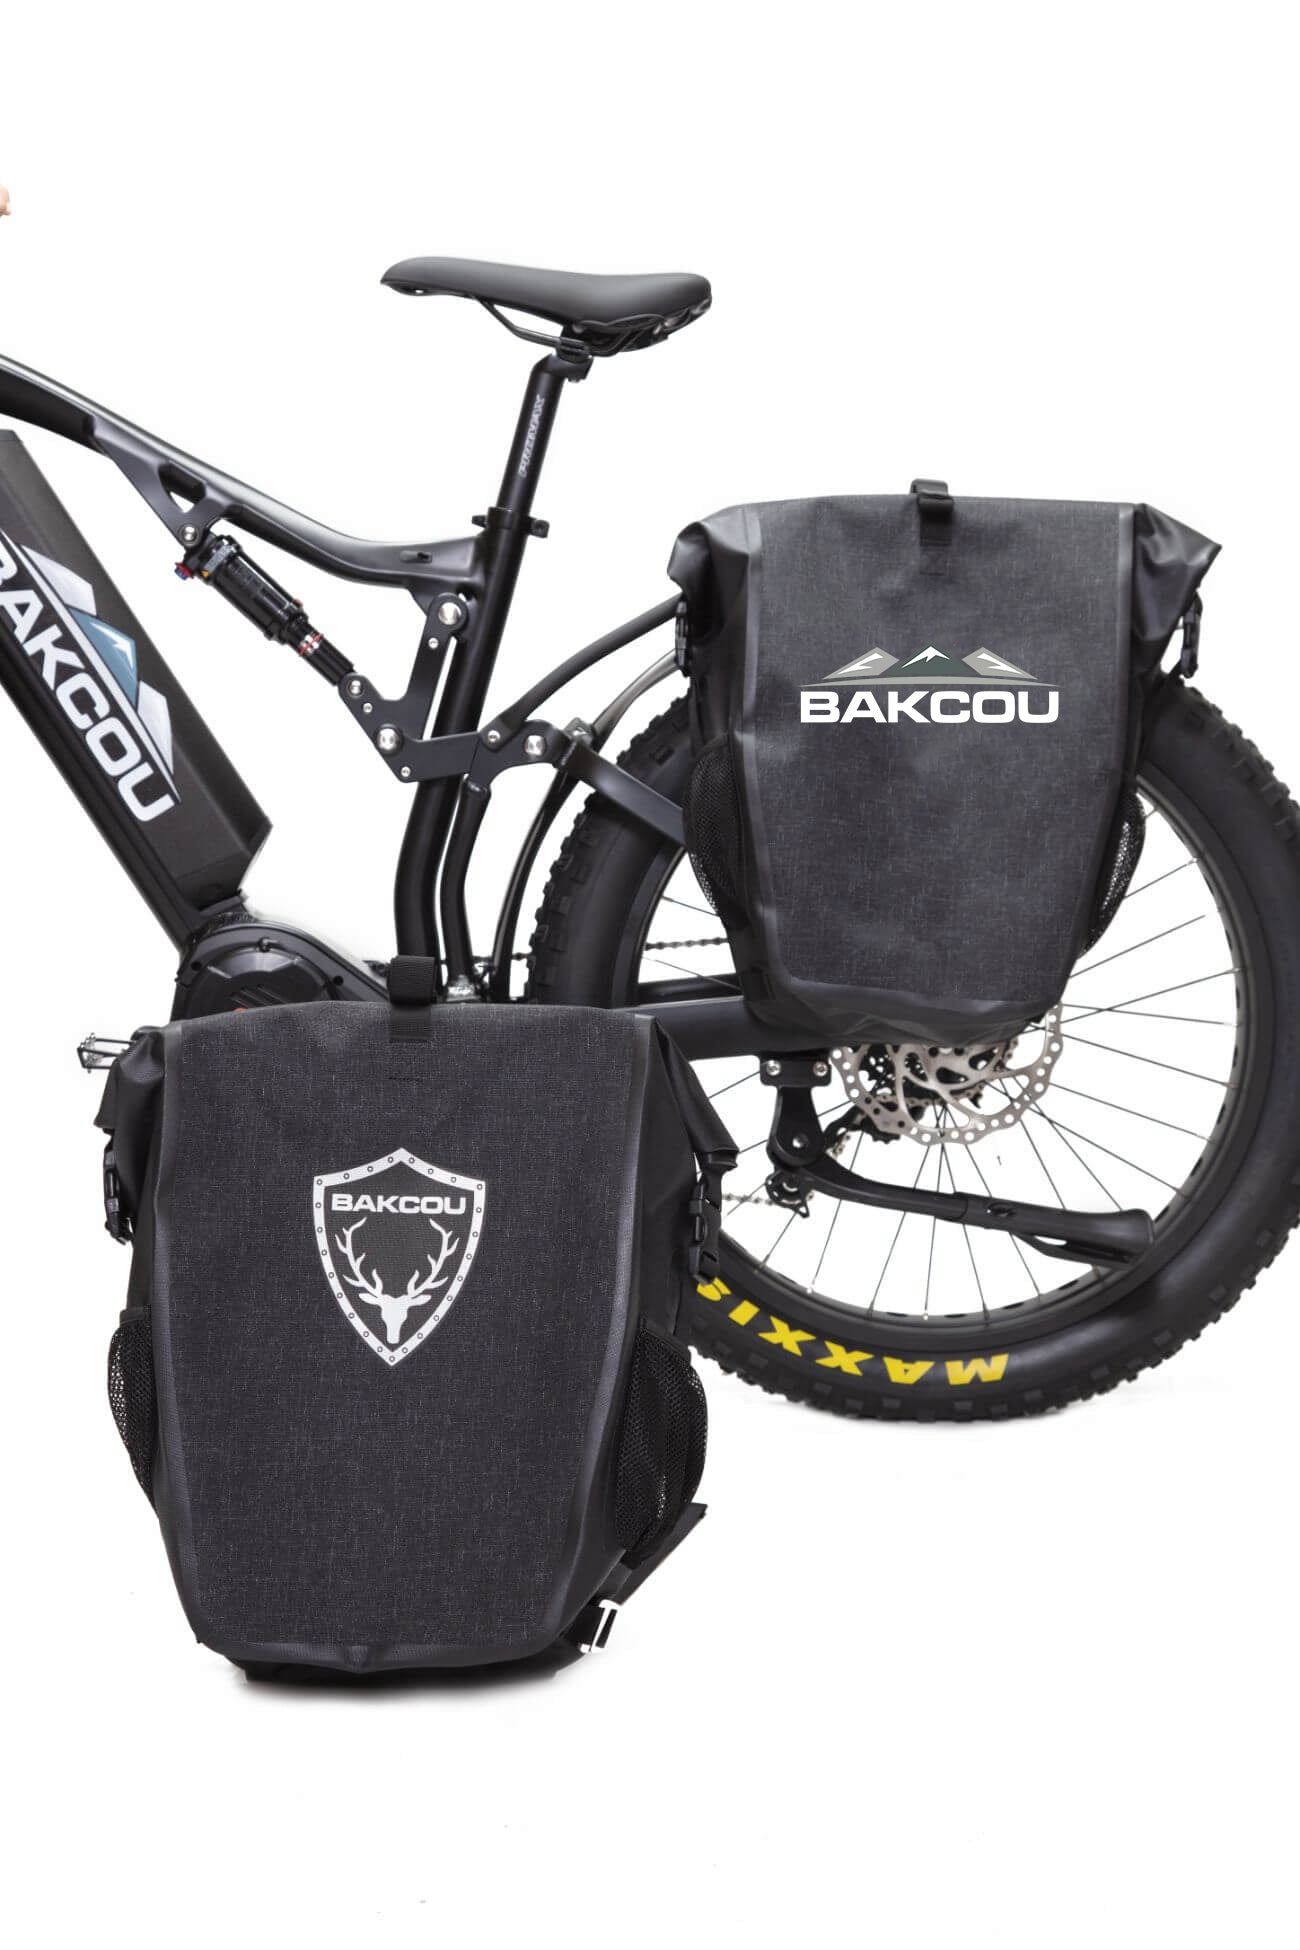 Pannier Bags for Electric Bikes